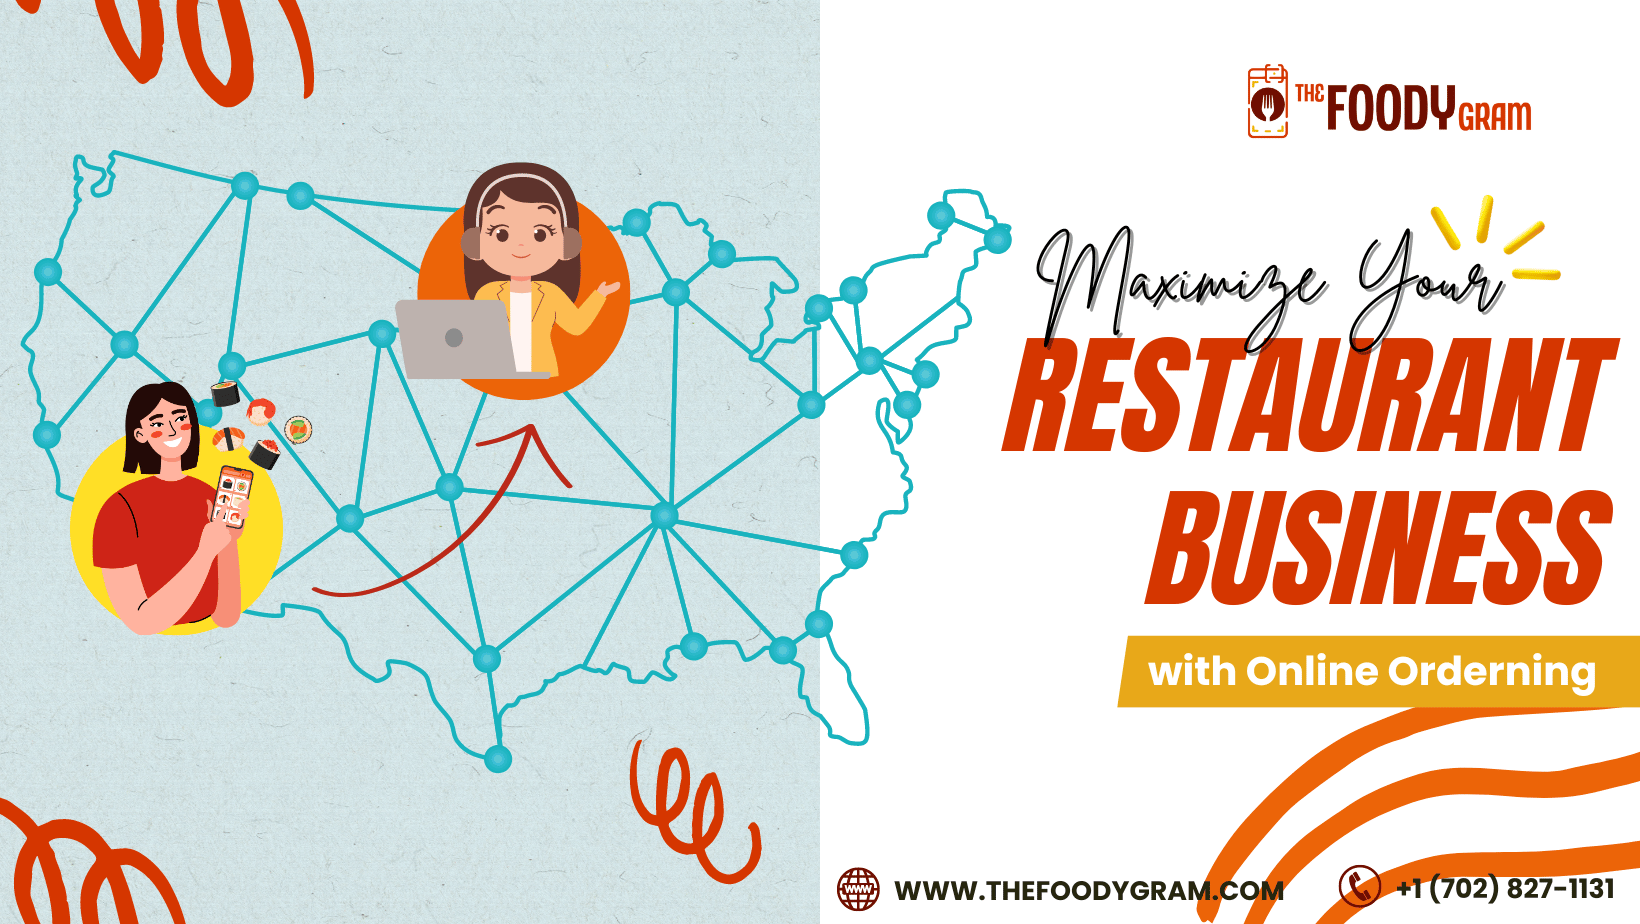 Maximize Your Restaurant Business with Online Ordering Restaurant Soft